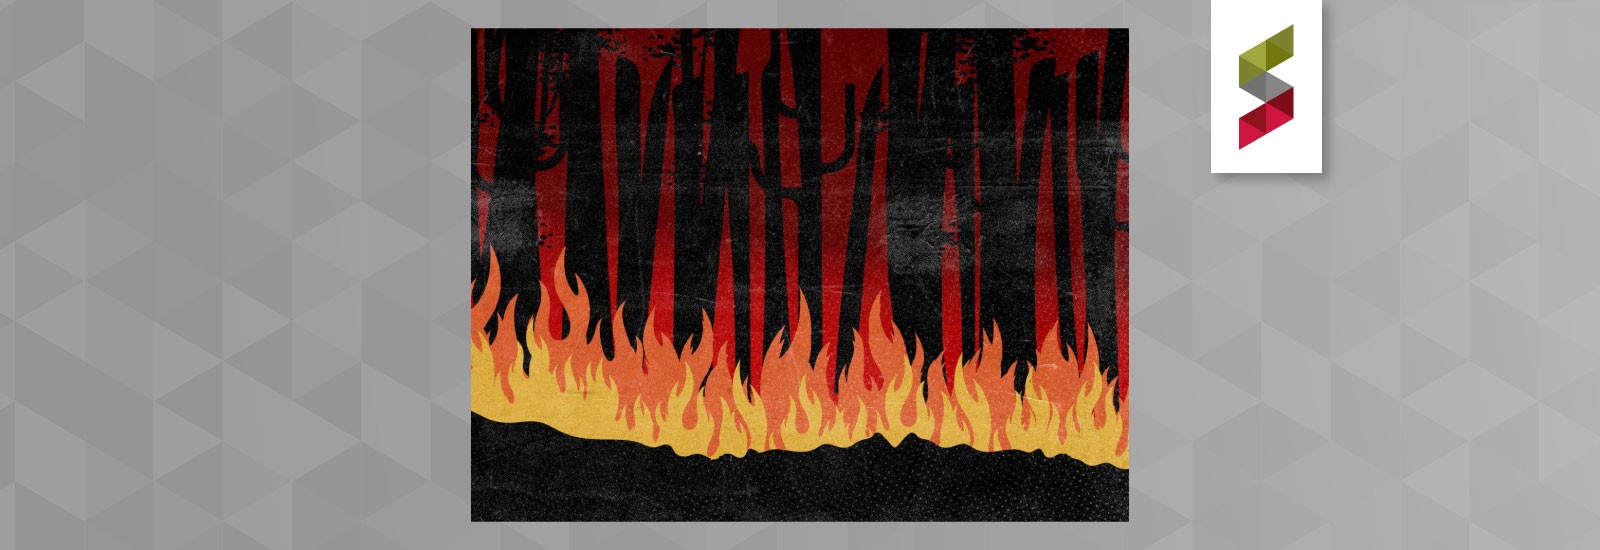 Illustration of a wildfire